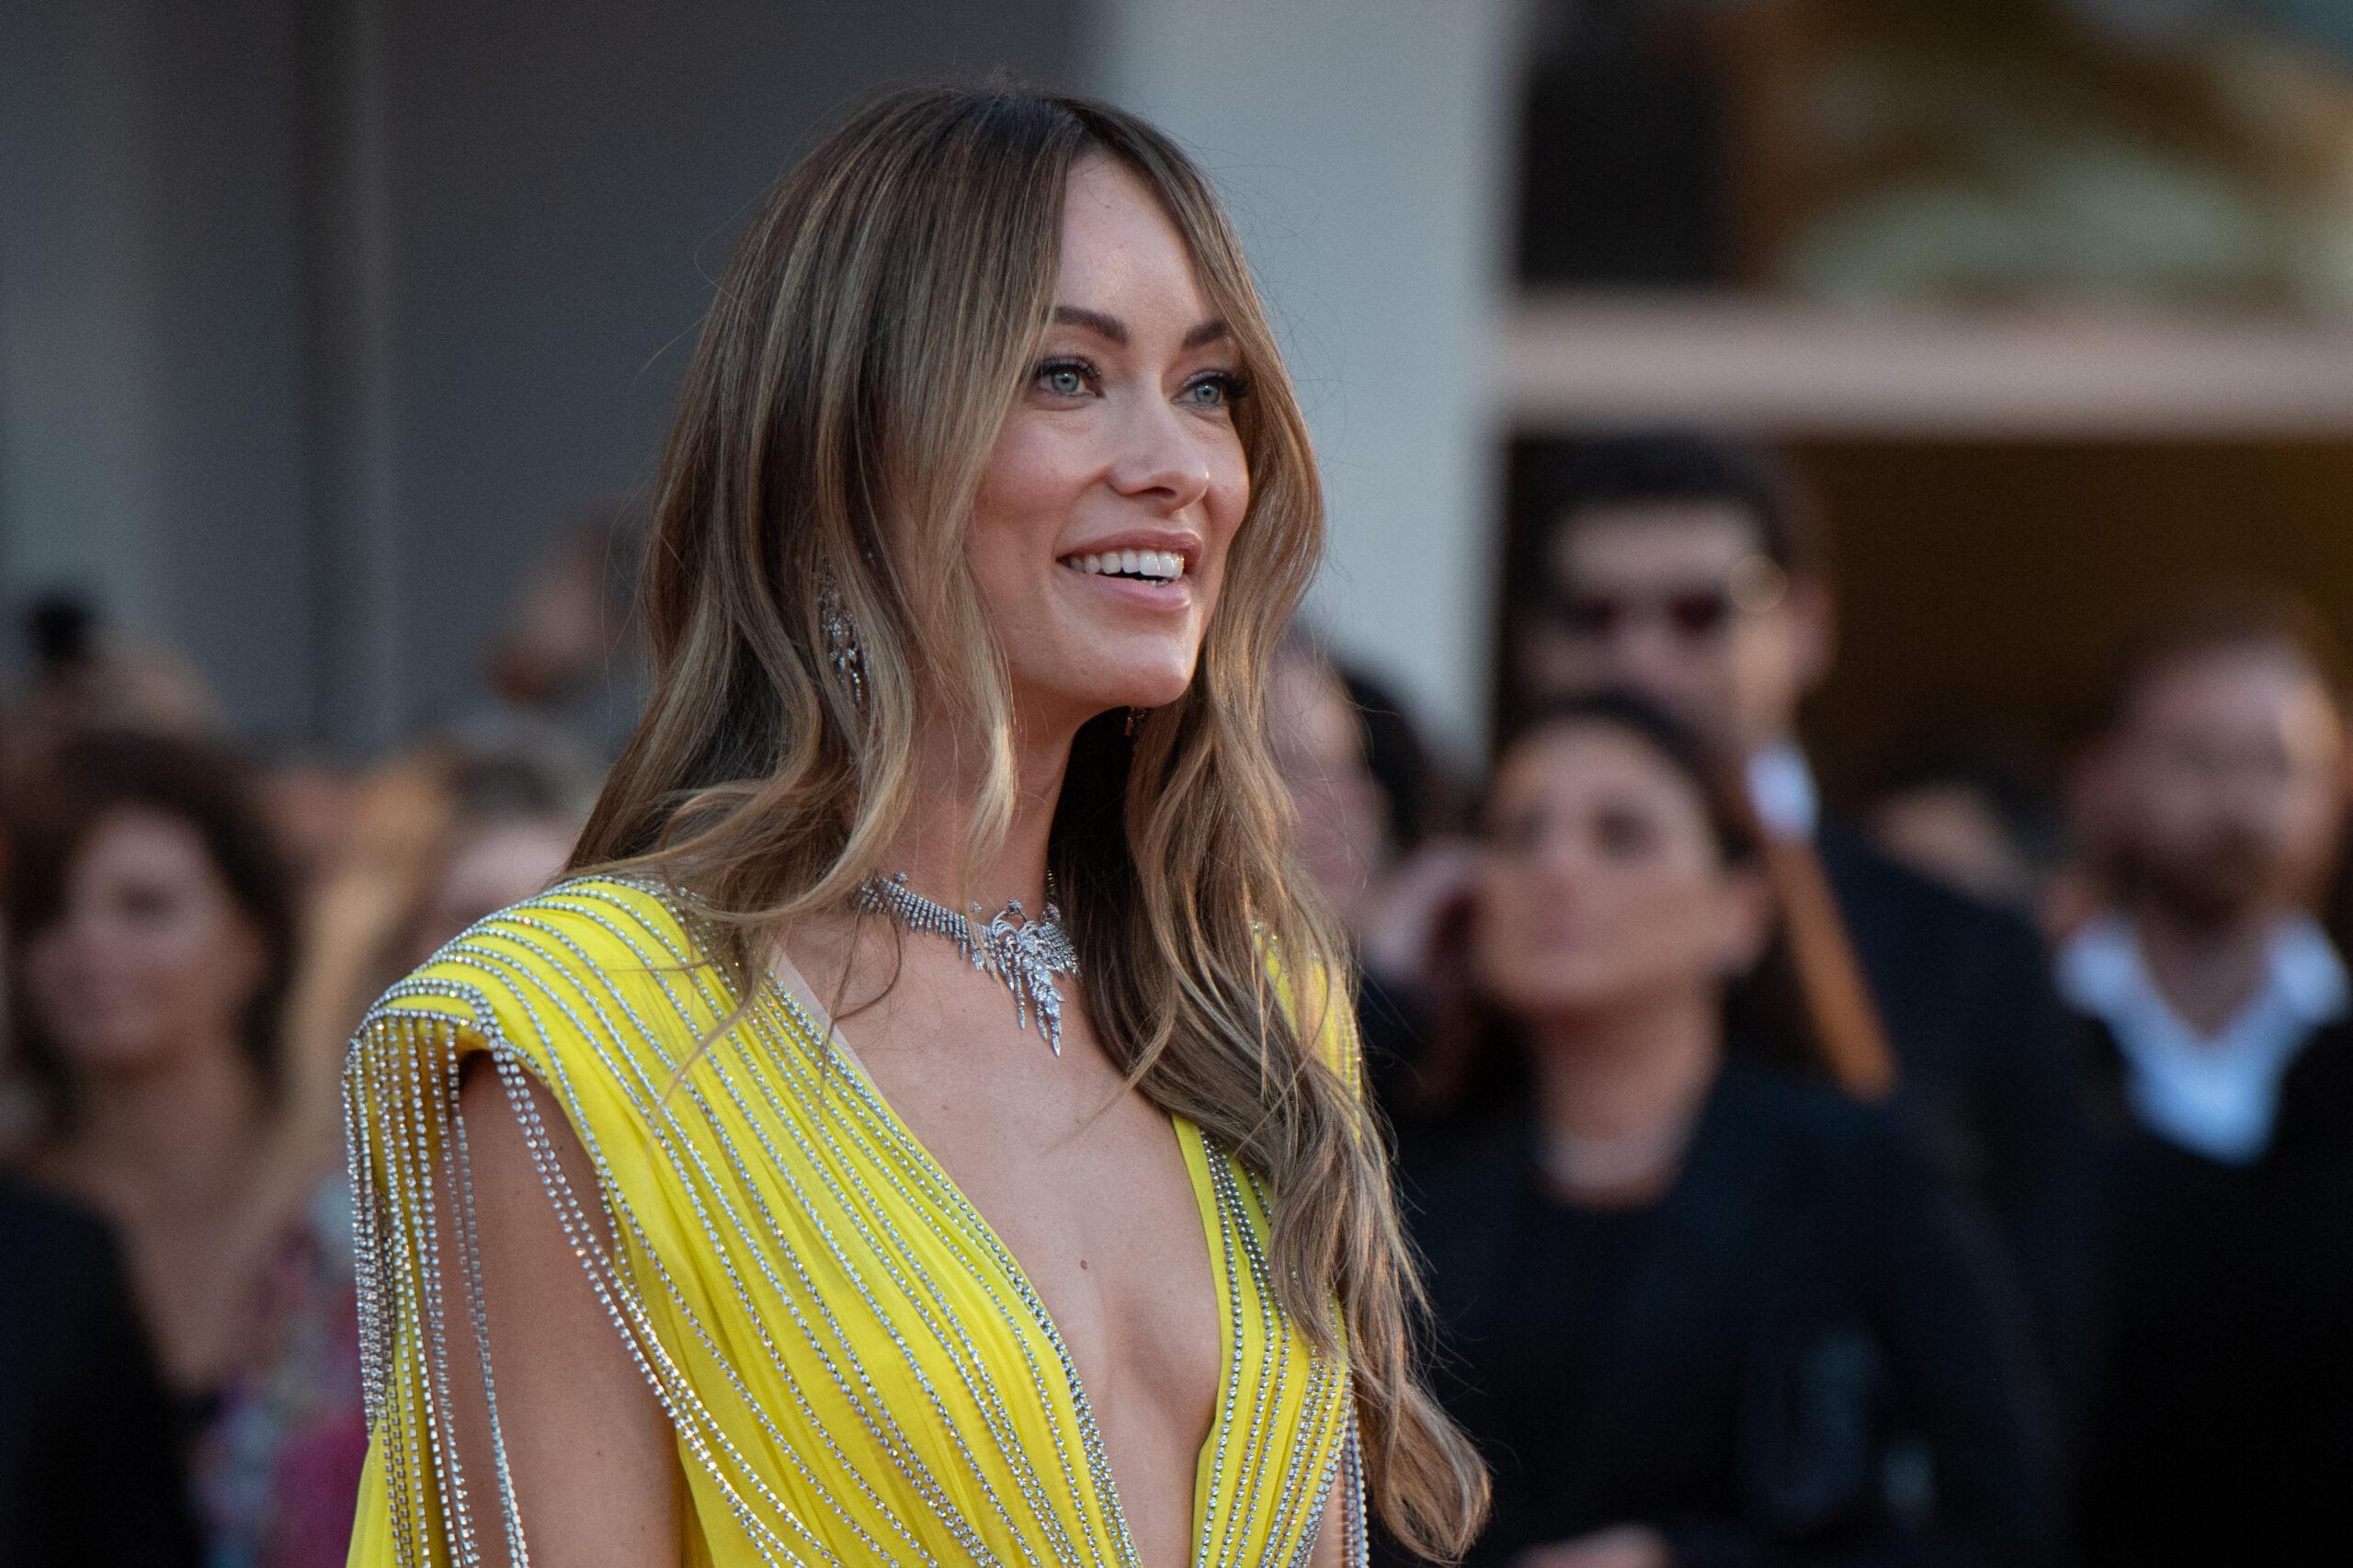 Olivia Wilde at the 79th Venice International Film Festival - "Don't Worry Darling" Red Carpet